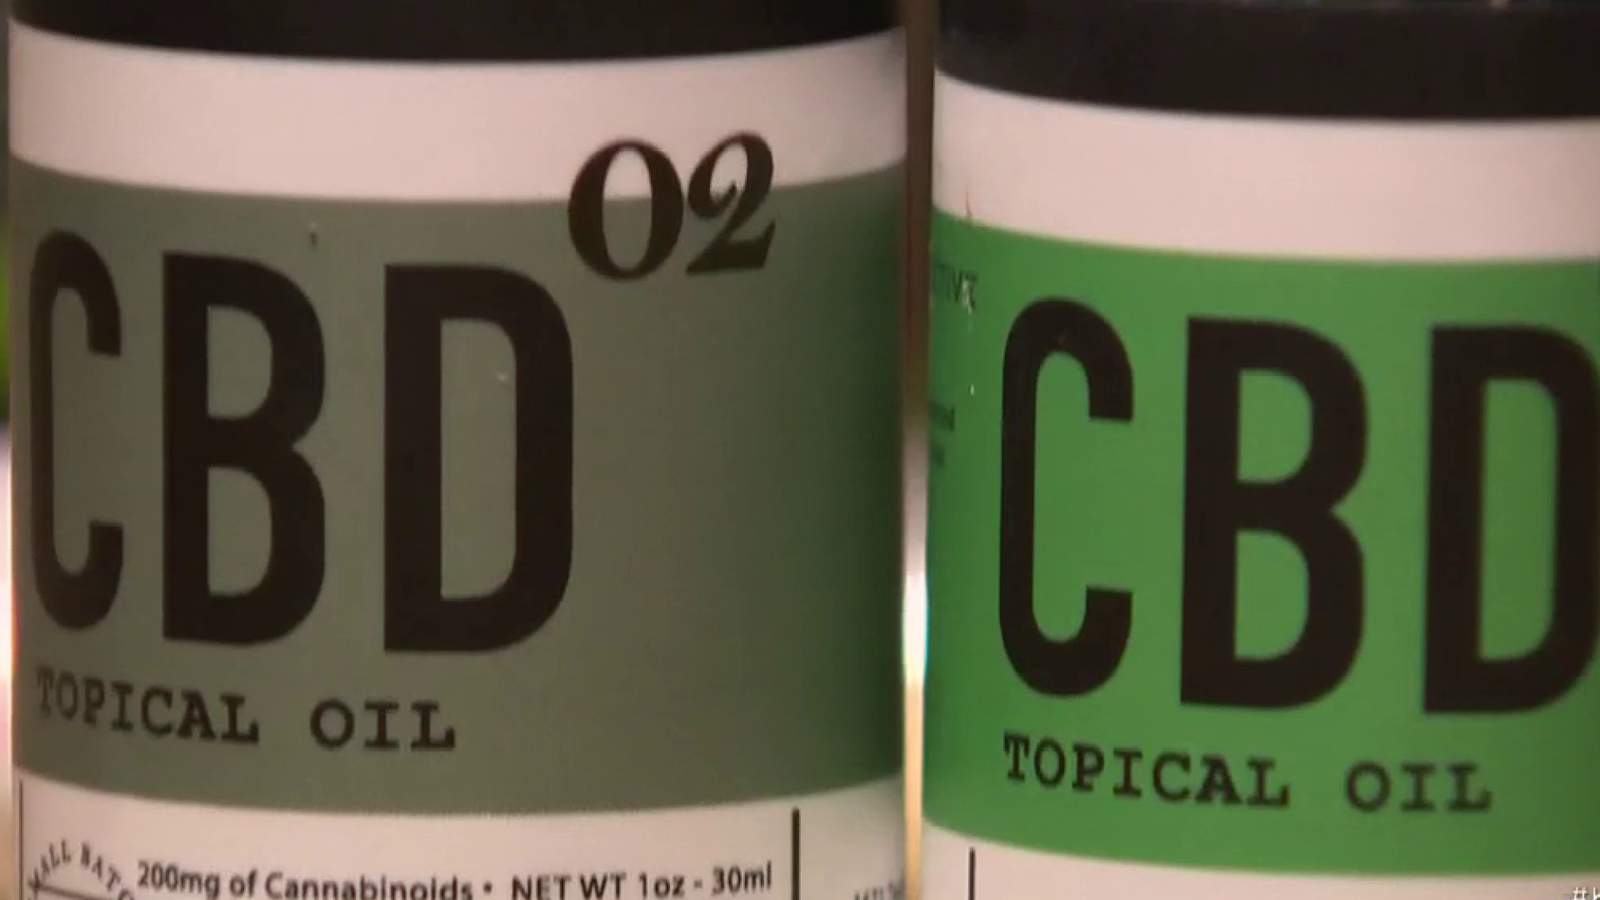 Do CBD products contain what they claim?